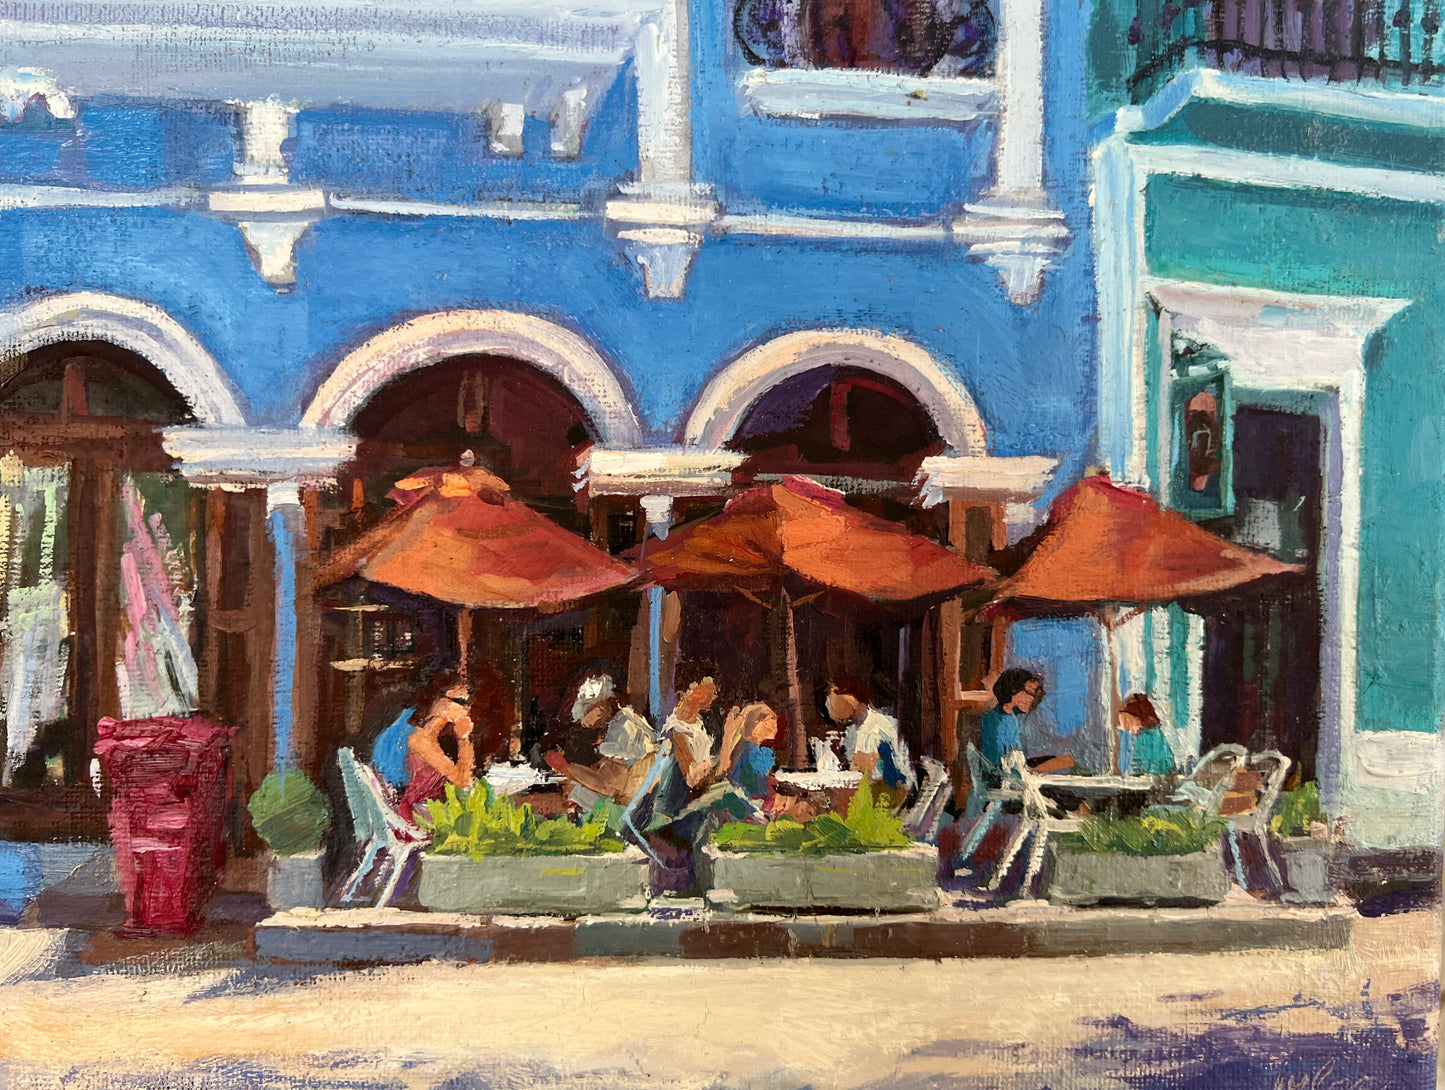 LUNCH UNDER THE RED UMBRELLAS IN OLD SAN JUAN - Original Oil Painting